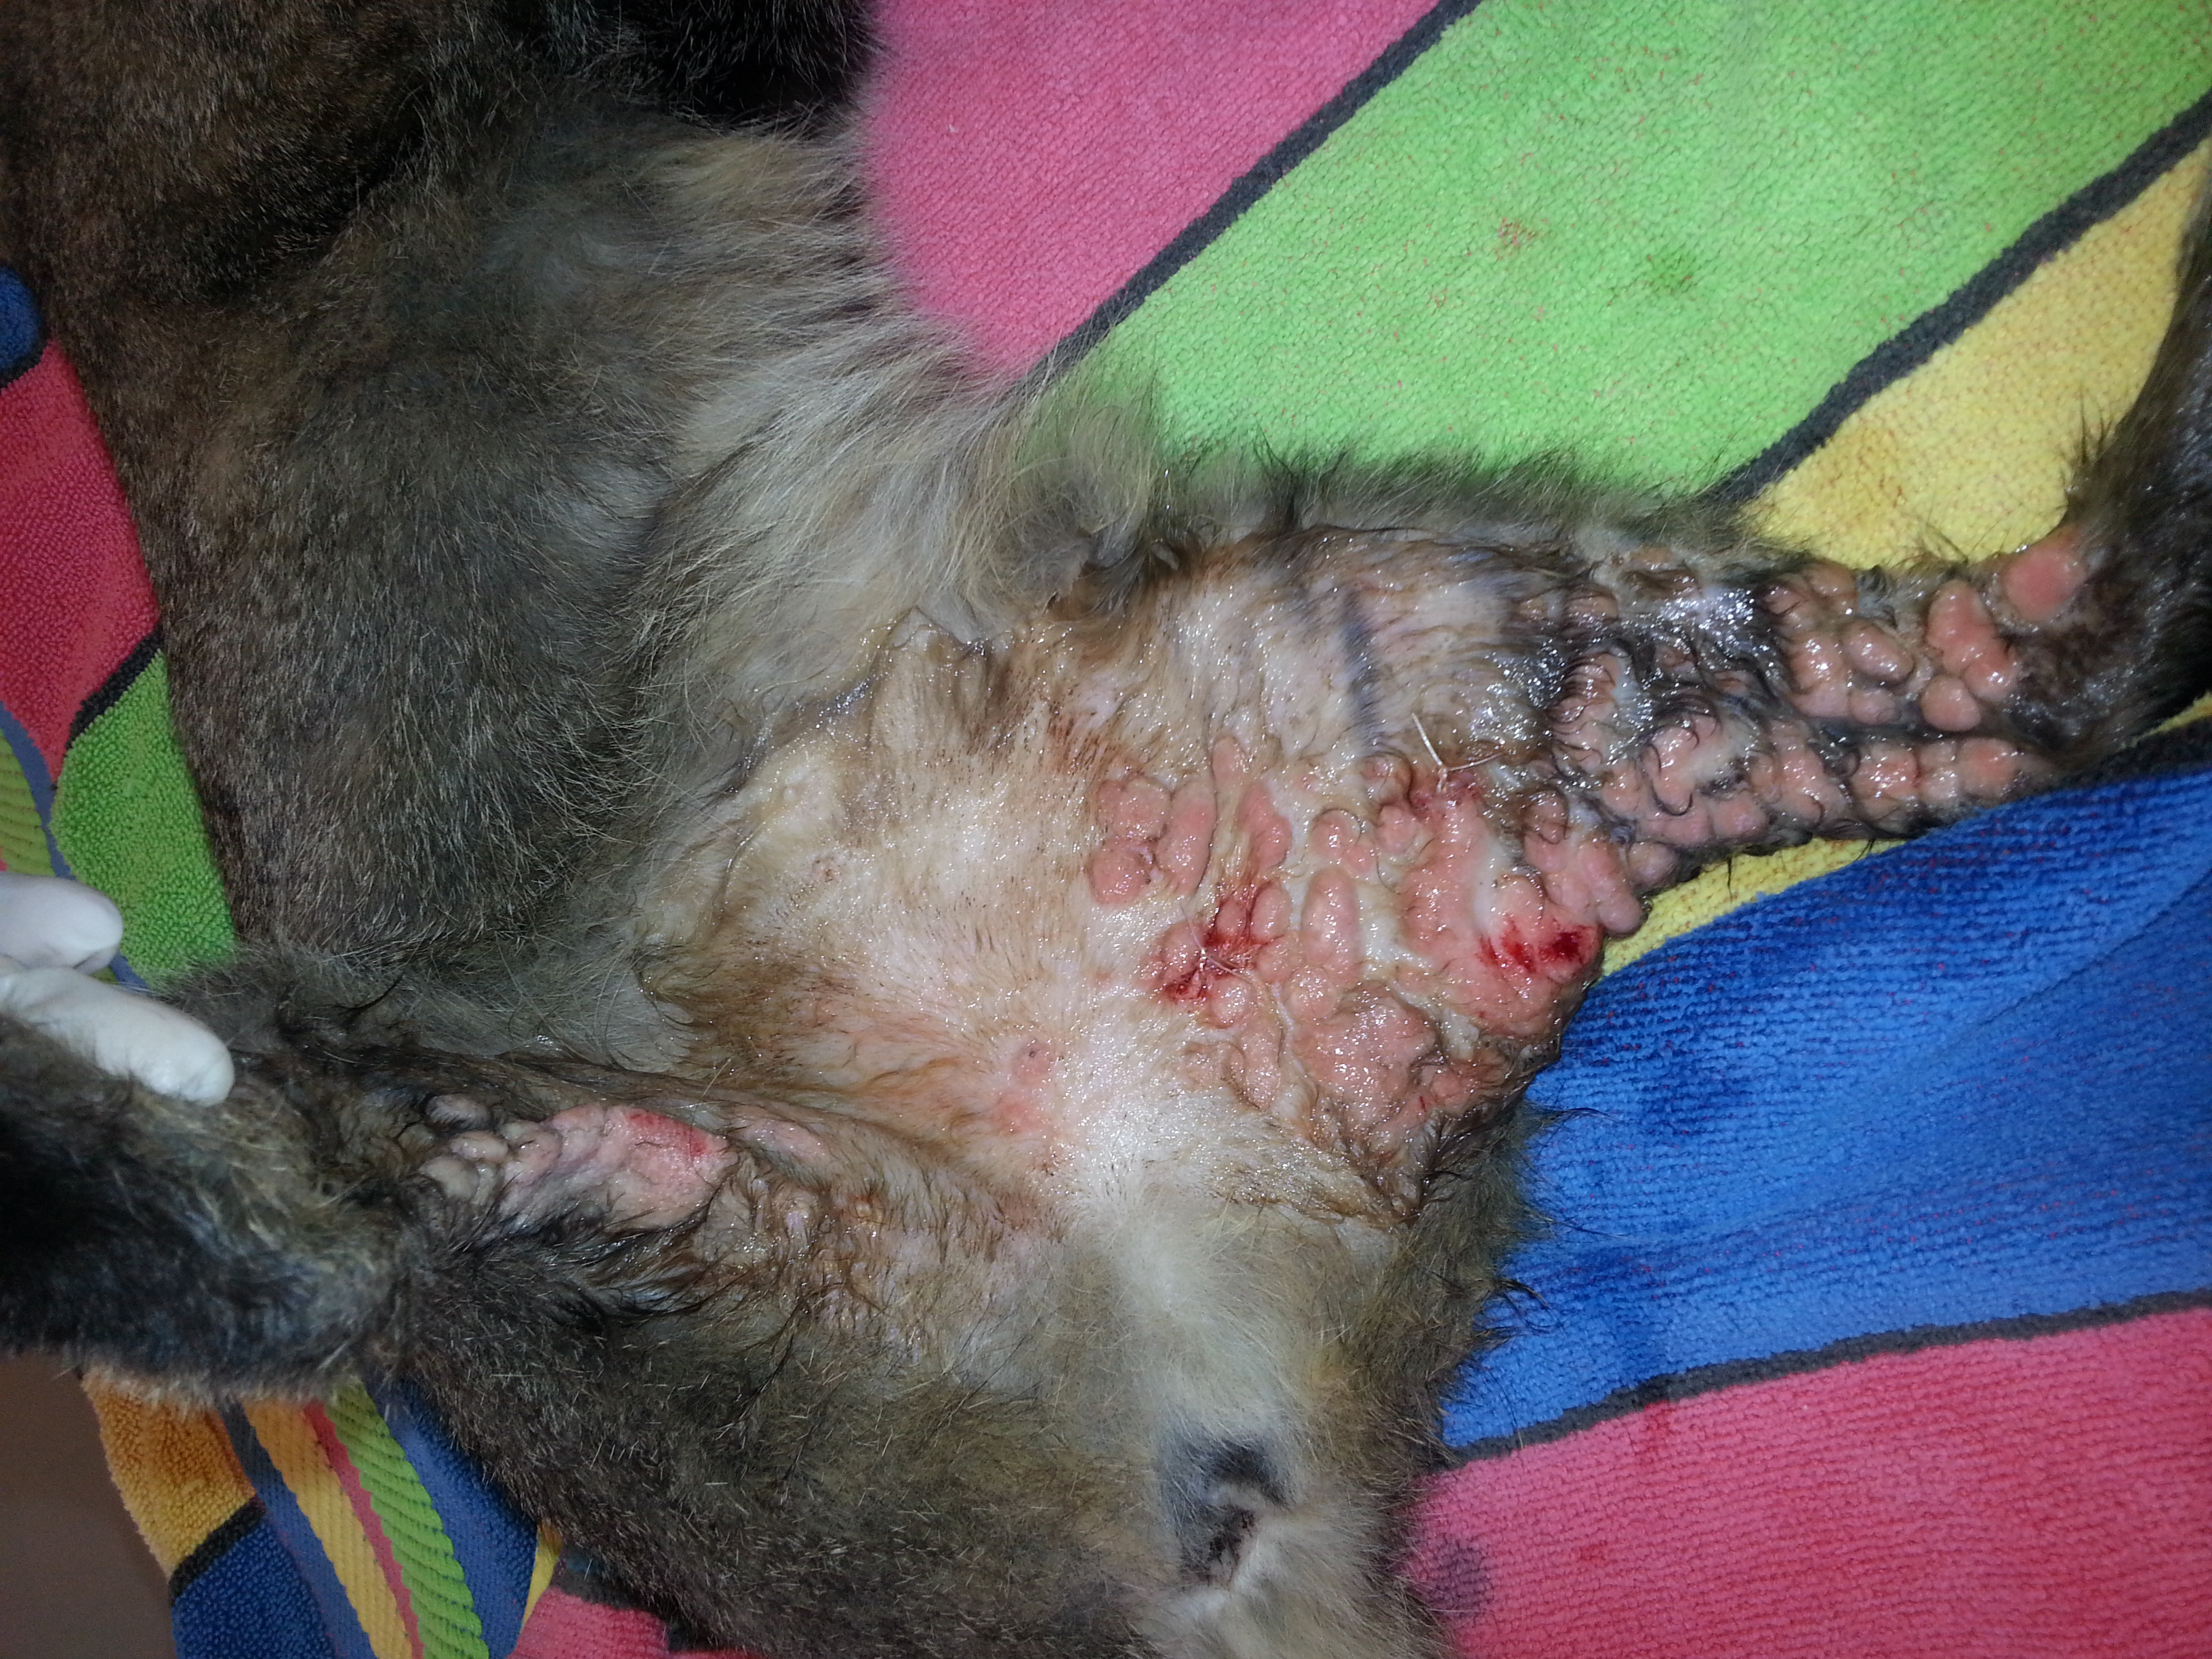 Skin in a 12y old cat.